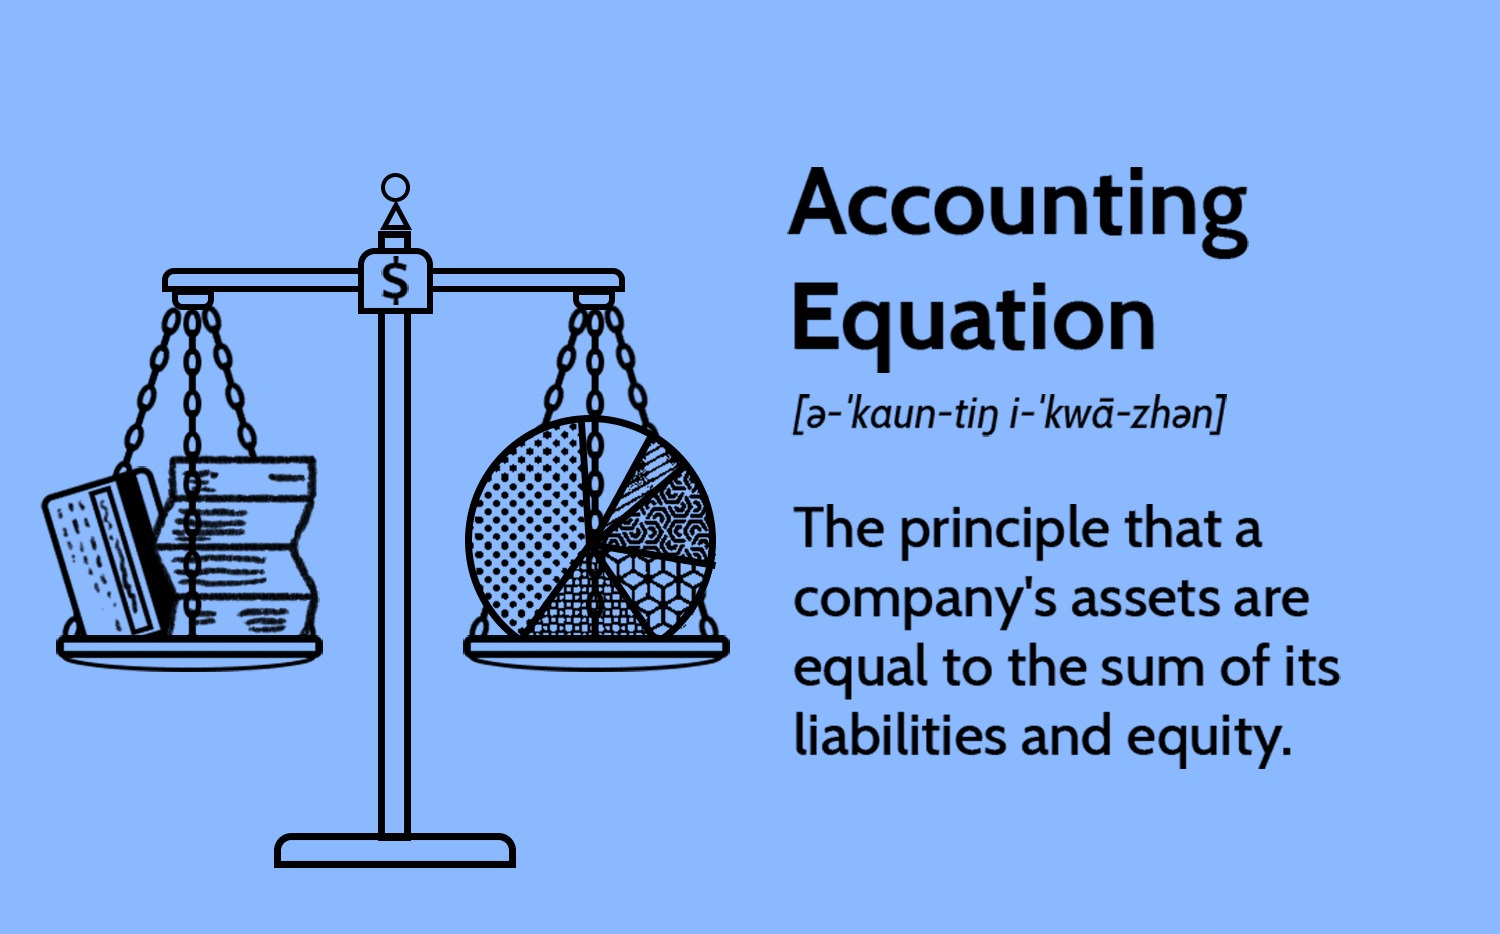 Investments By Stockholders Have What Effect On The Accounting Equation?